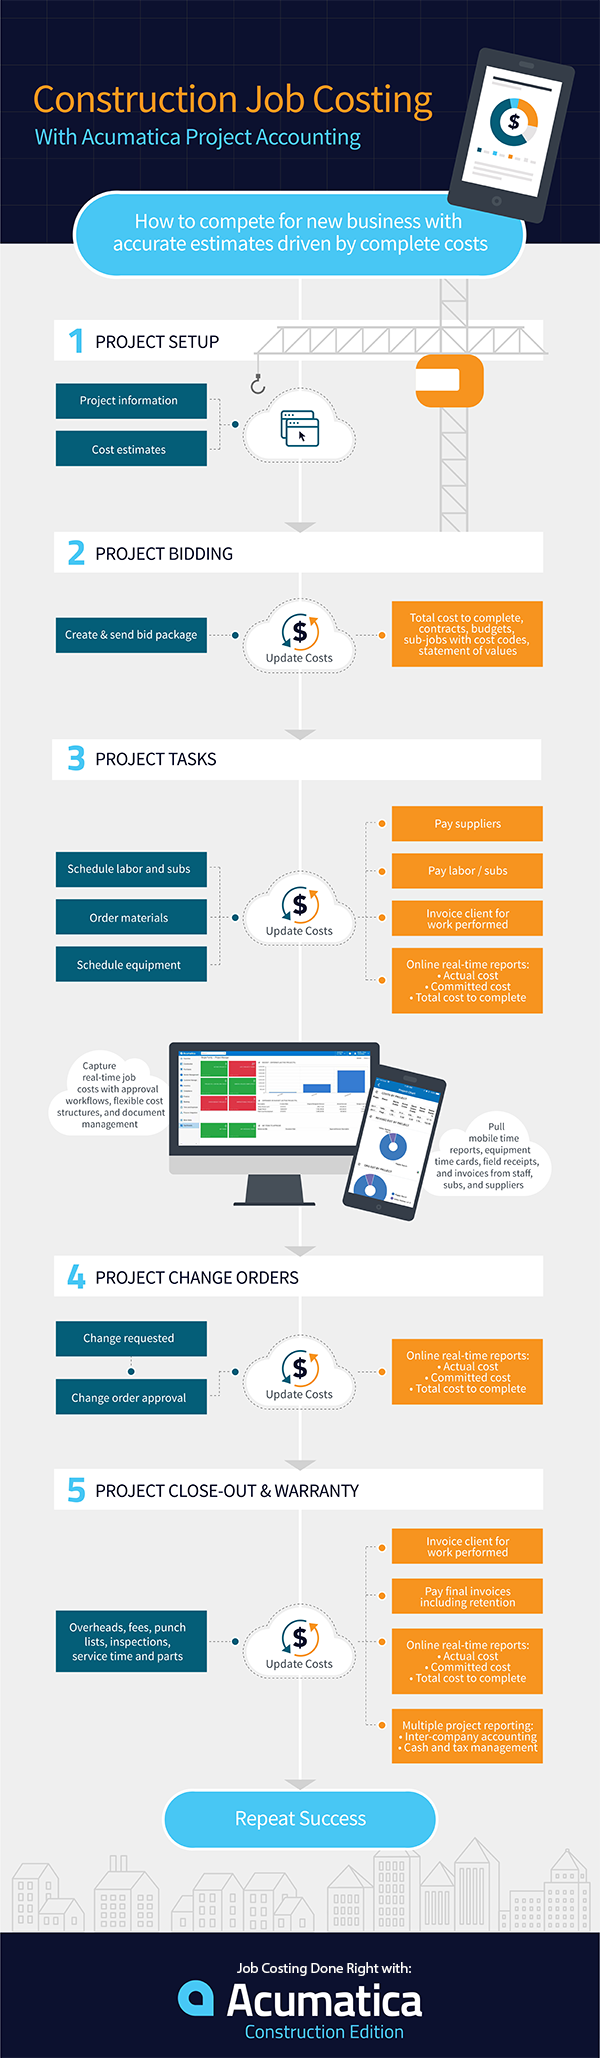 Check out the below infographic to see how Acumatica helps ensure accurate construction job costing